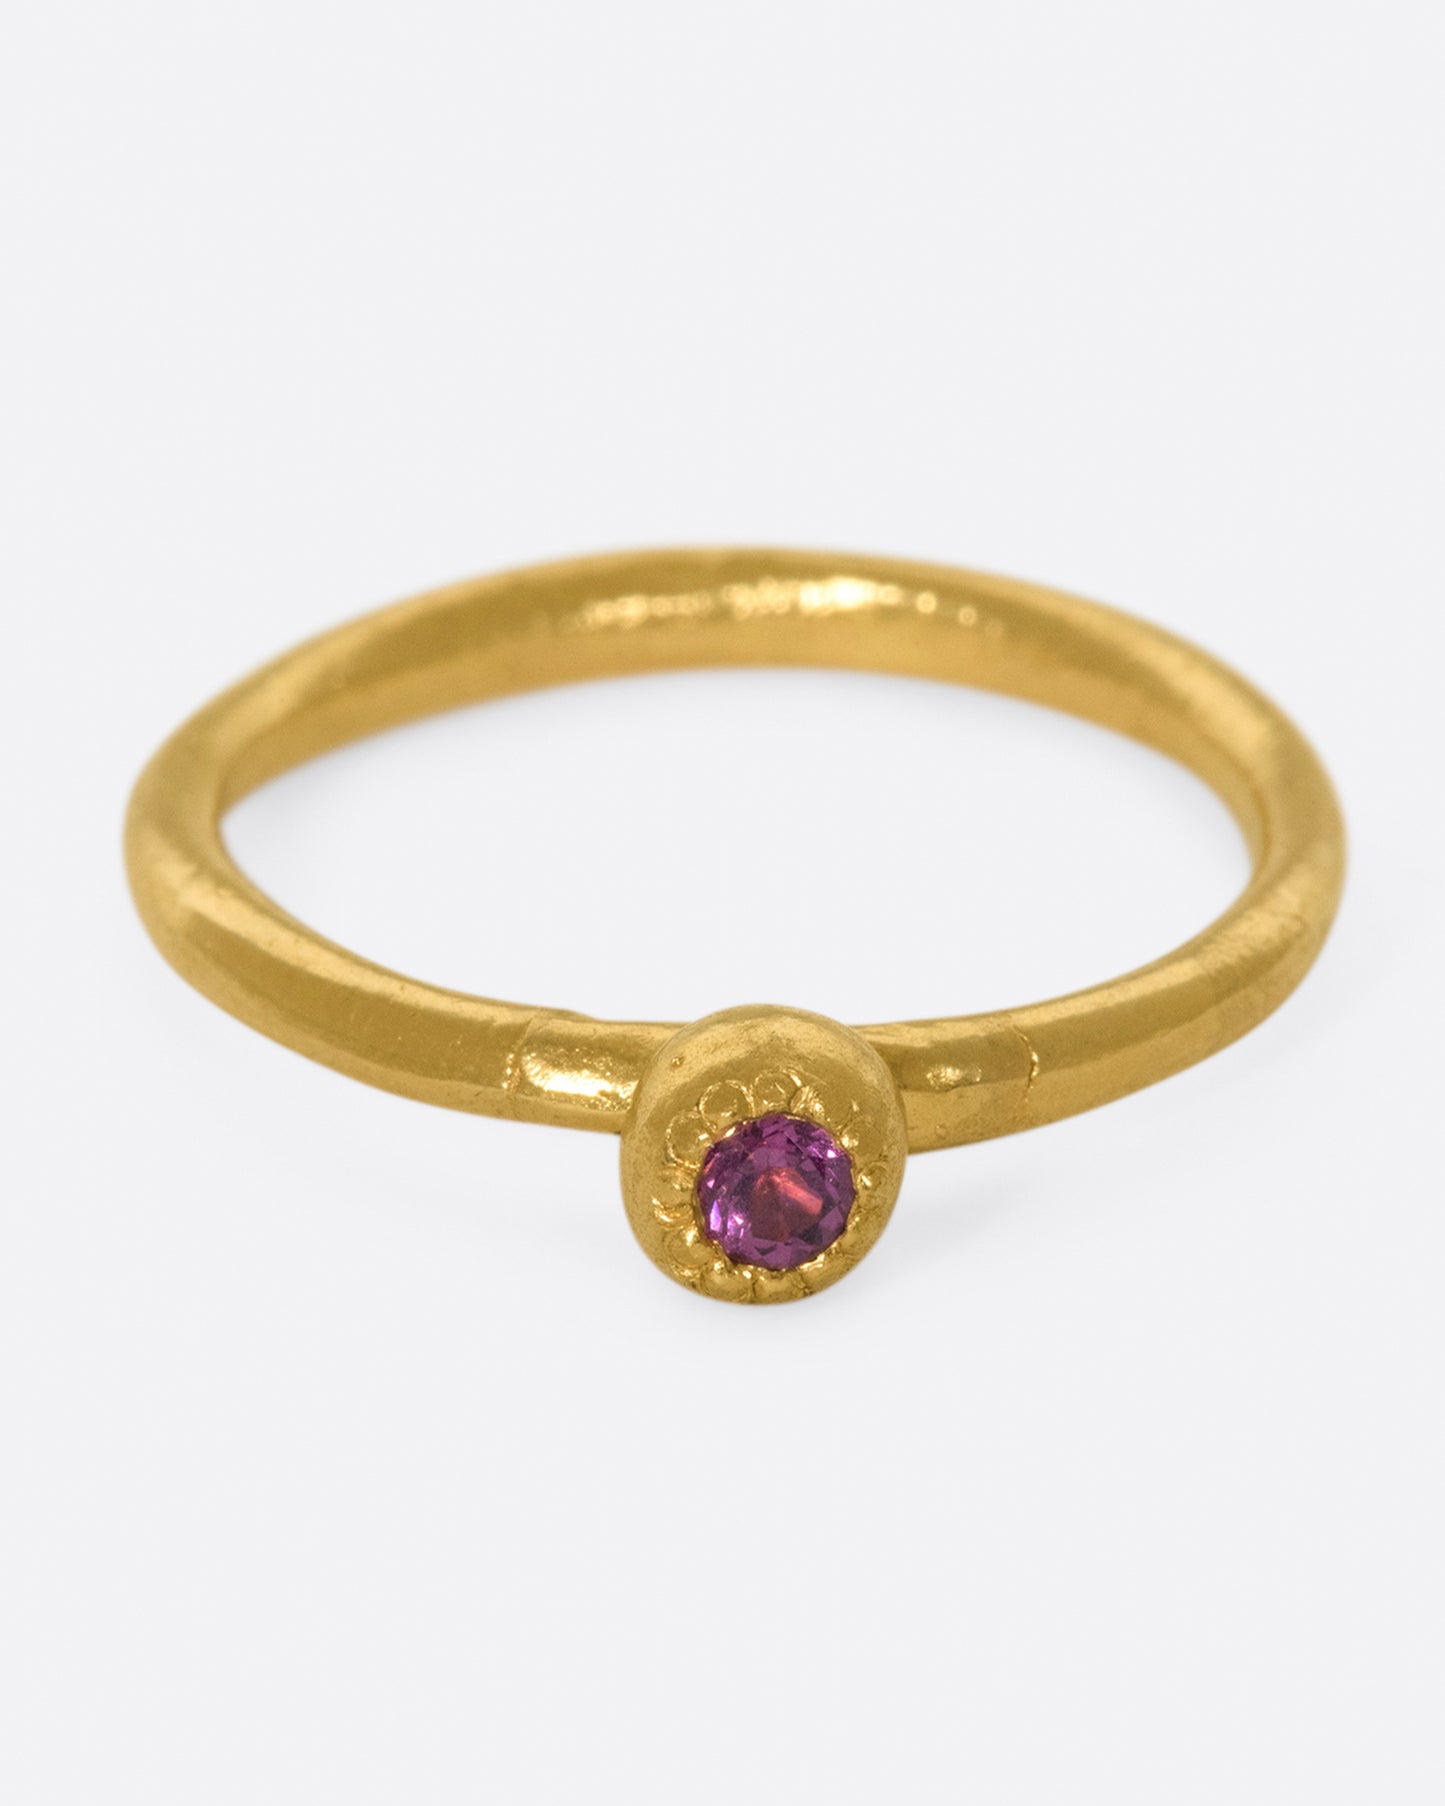 A high karat gold solitaire ring with a rosy pink tourmaline at its center.